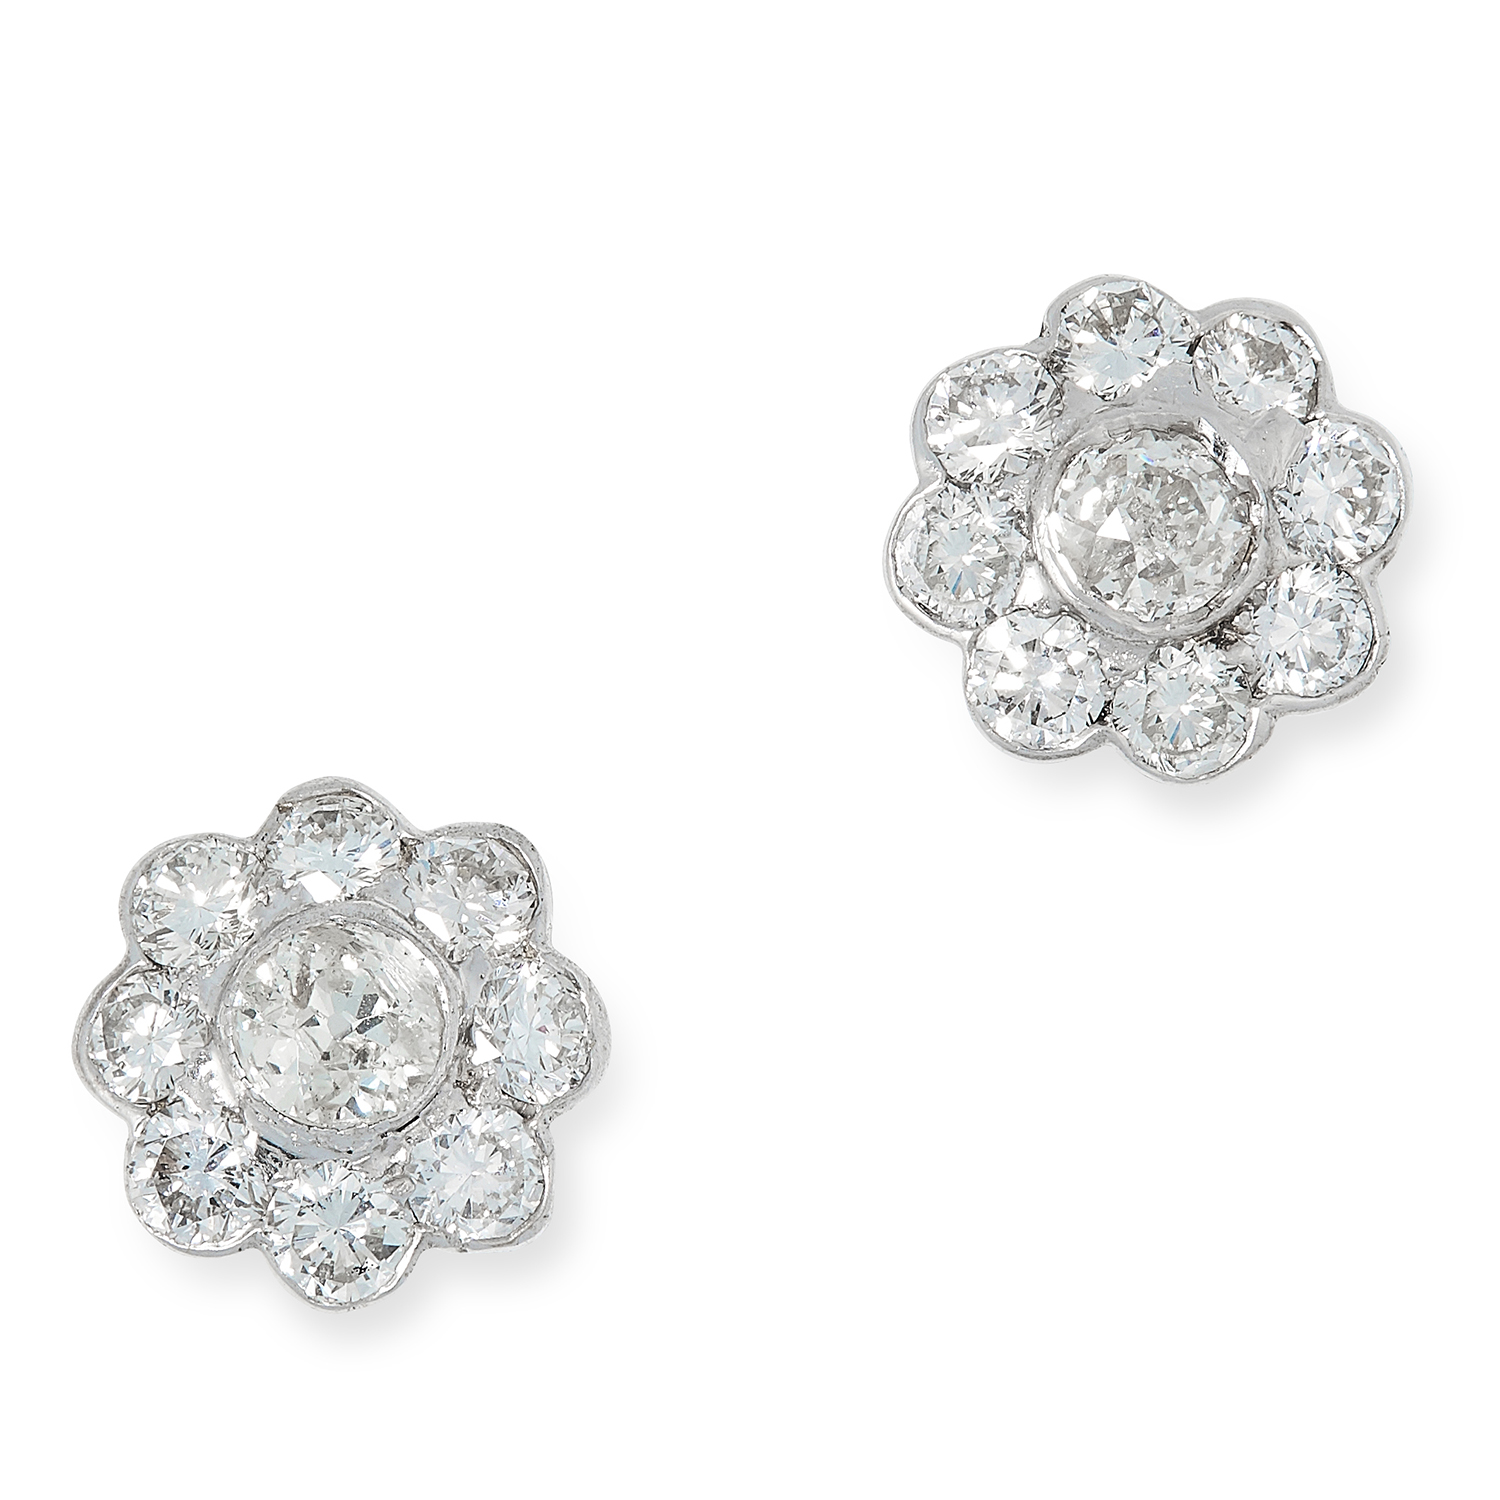 DIAMOND CLUSTER EARRINGS set with round cut diamonds totalling approximately 1.64 carats, 3.3g.